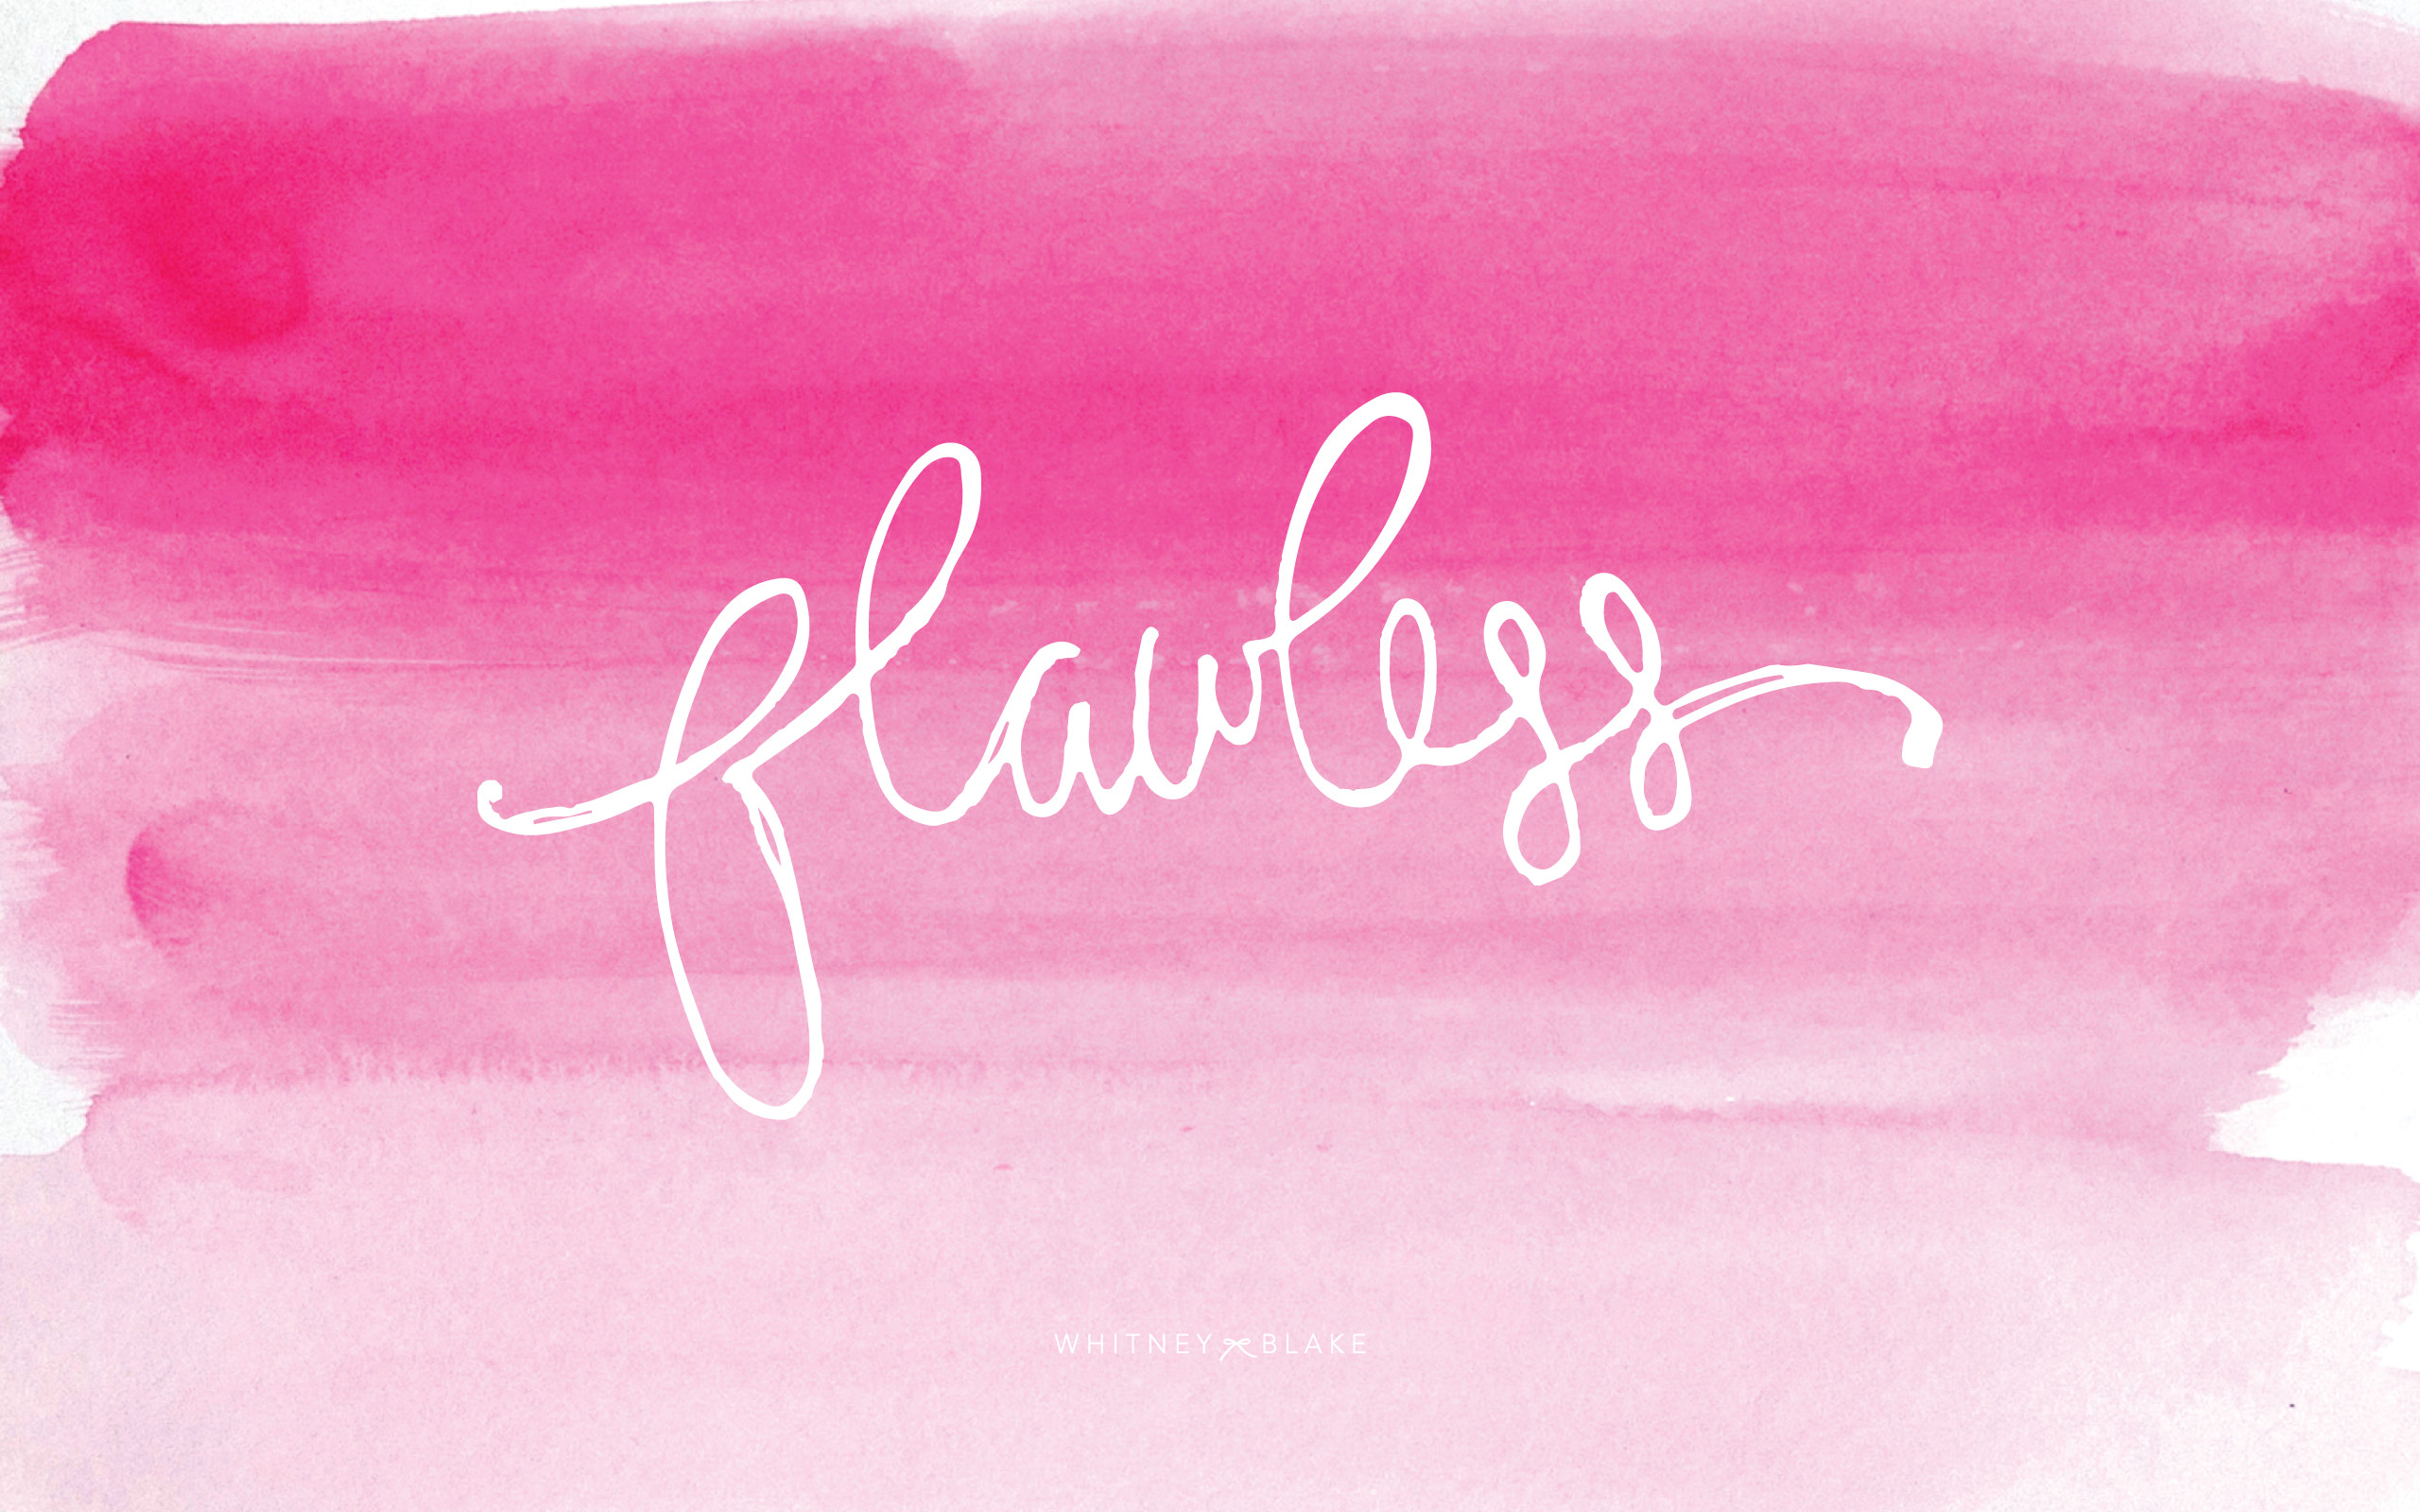 Download the PINK FLAWLESS iPhone 4 , iPhone5 , or desktop background